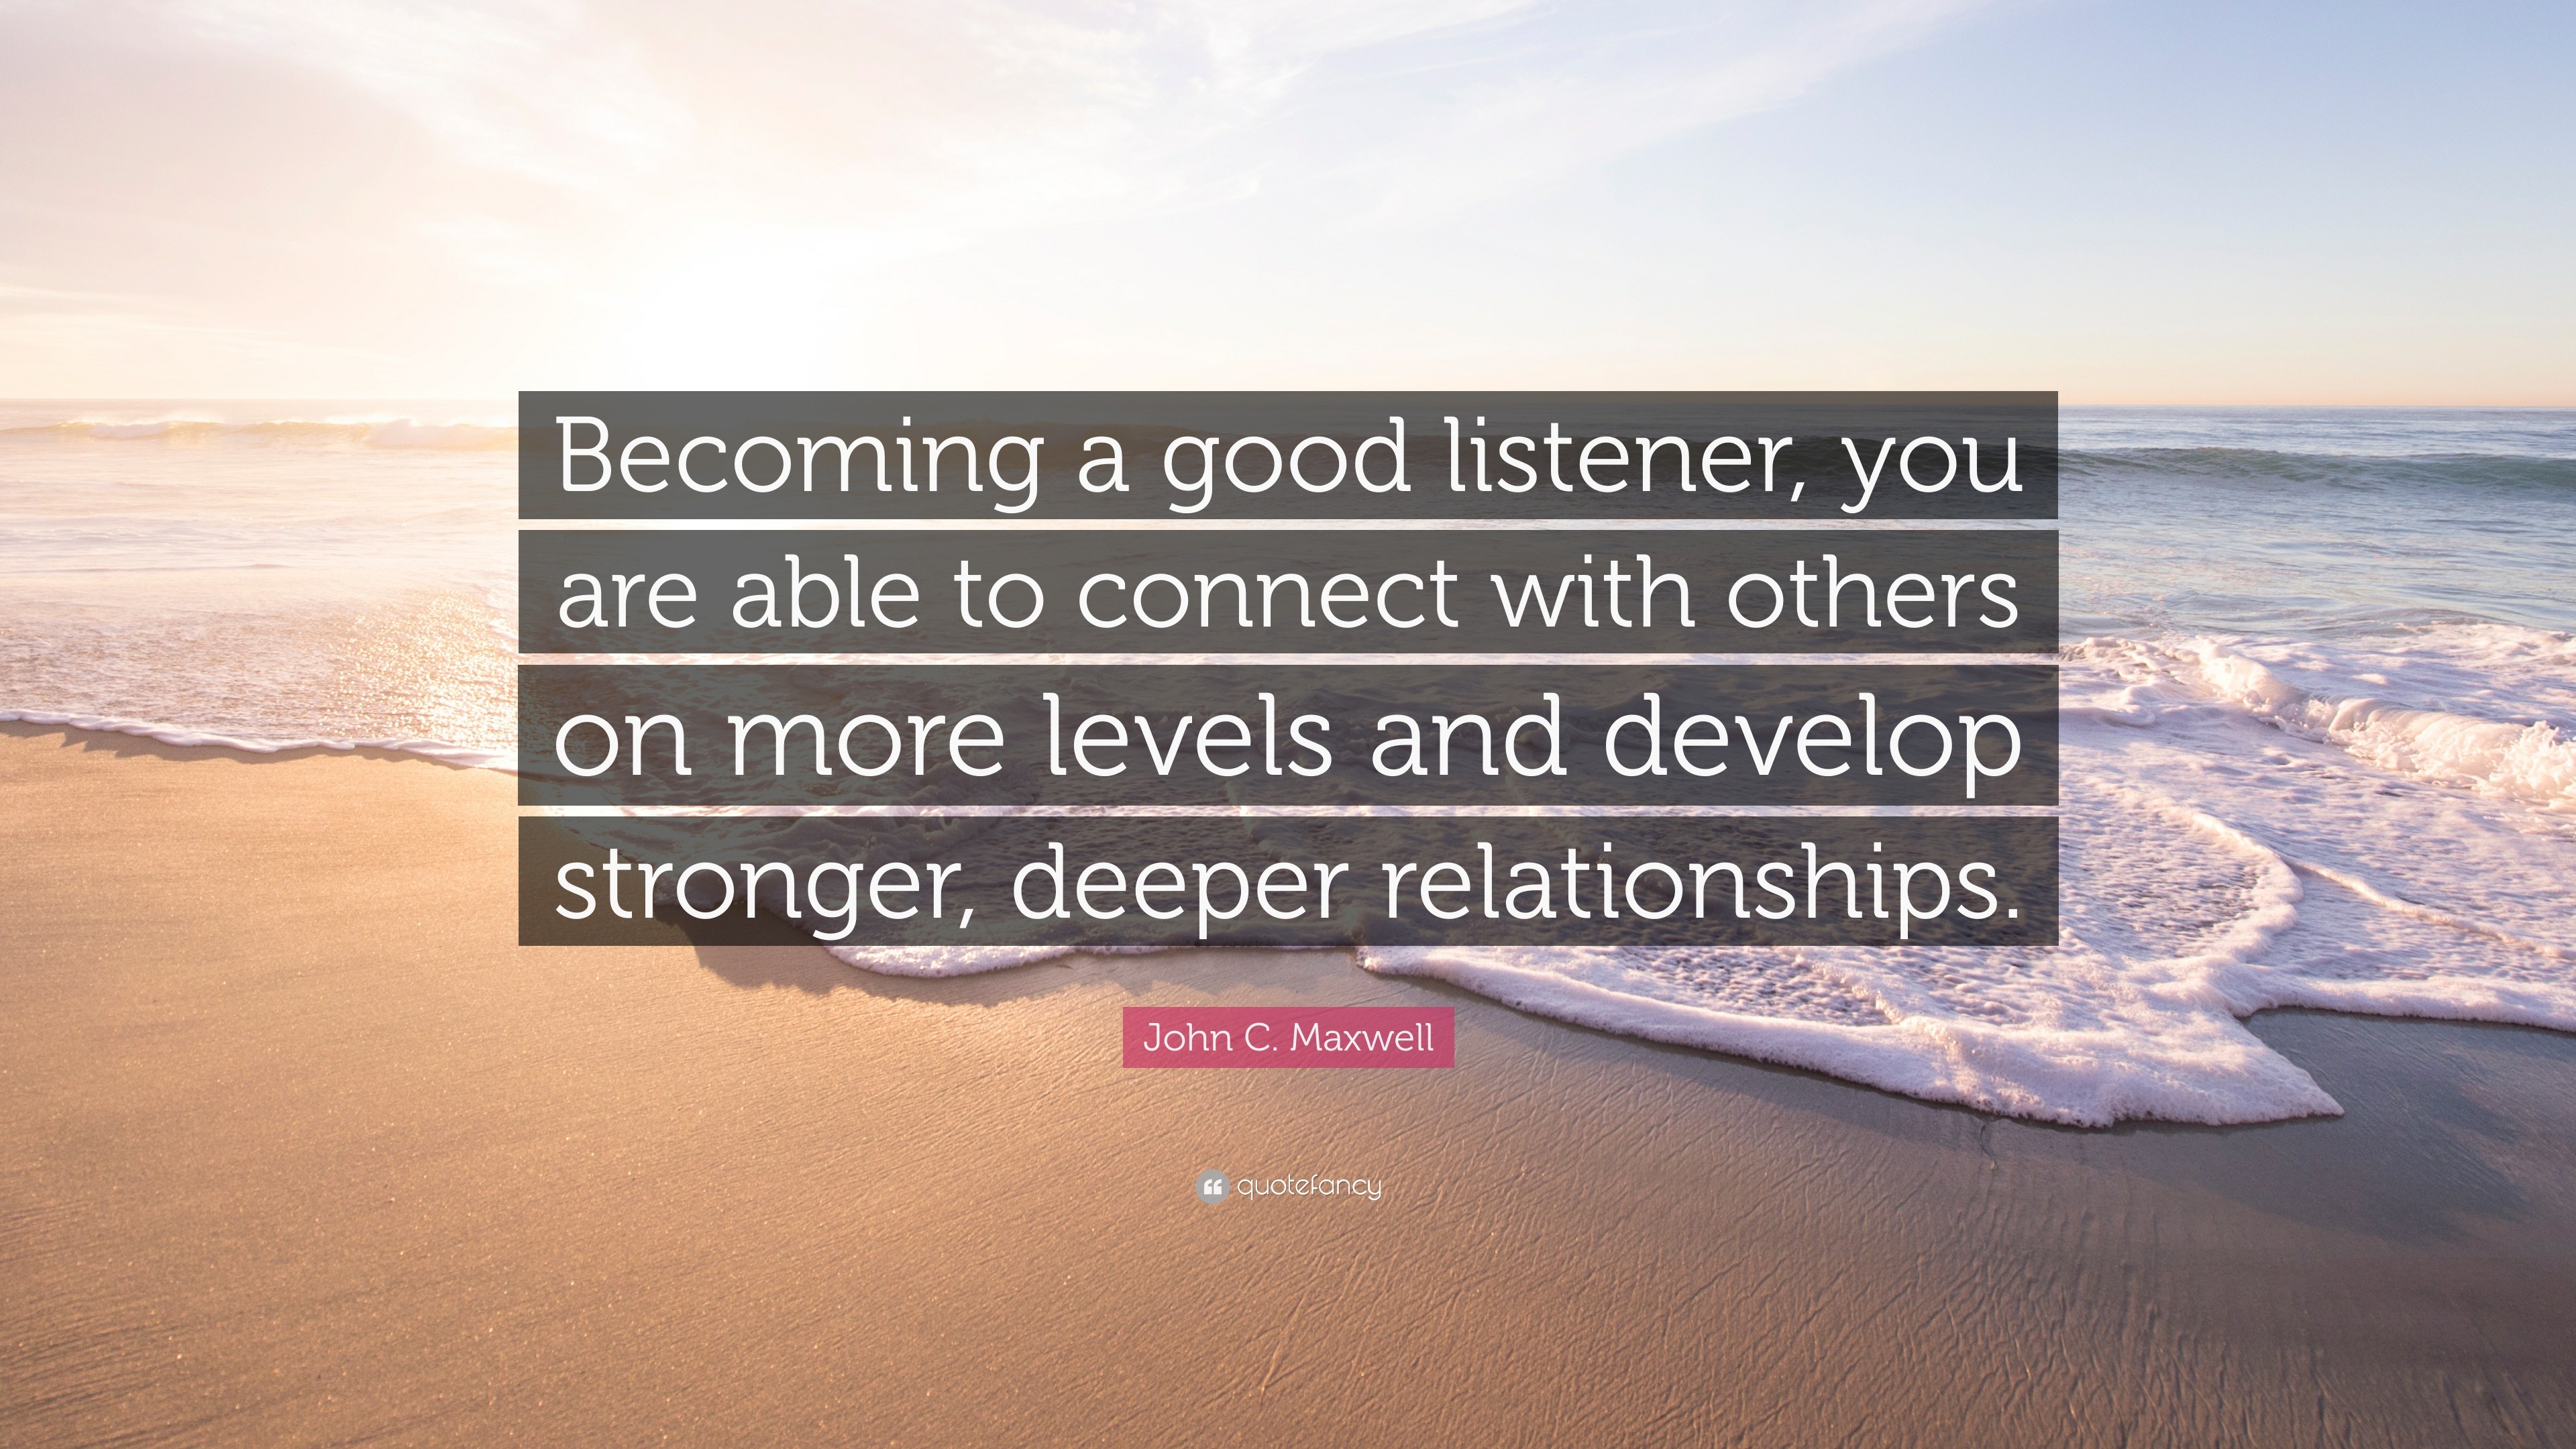 John C. Maxwell Quote a good listener, you are